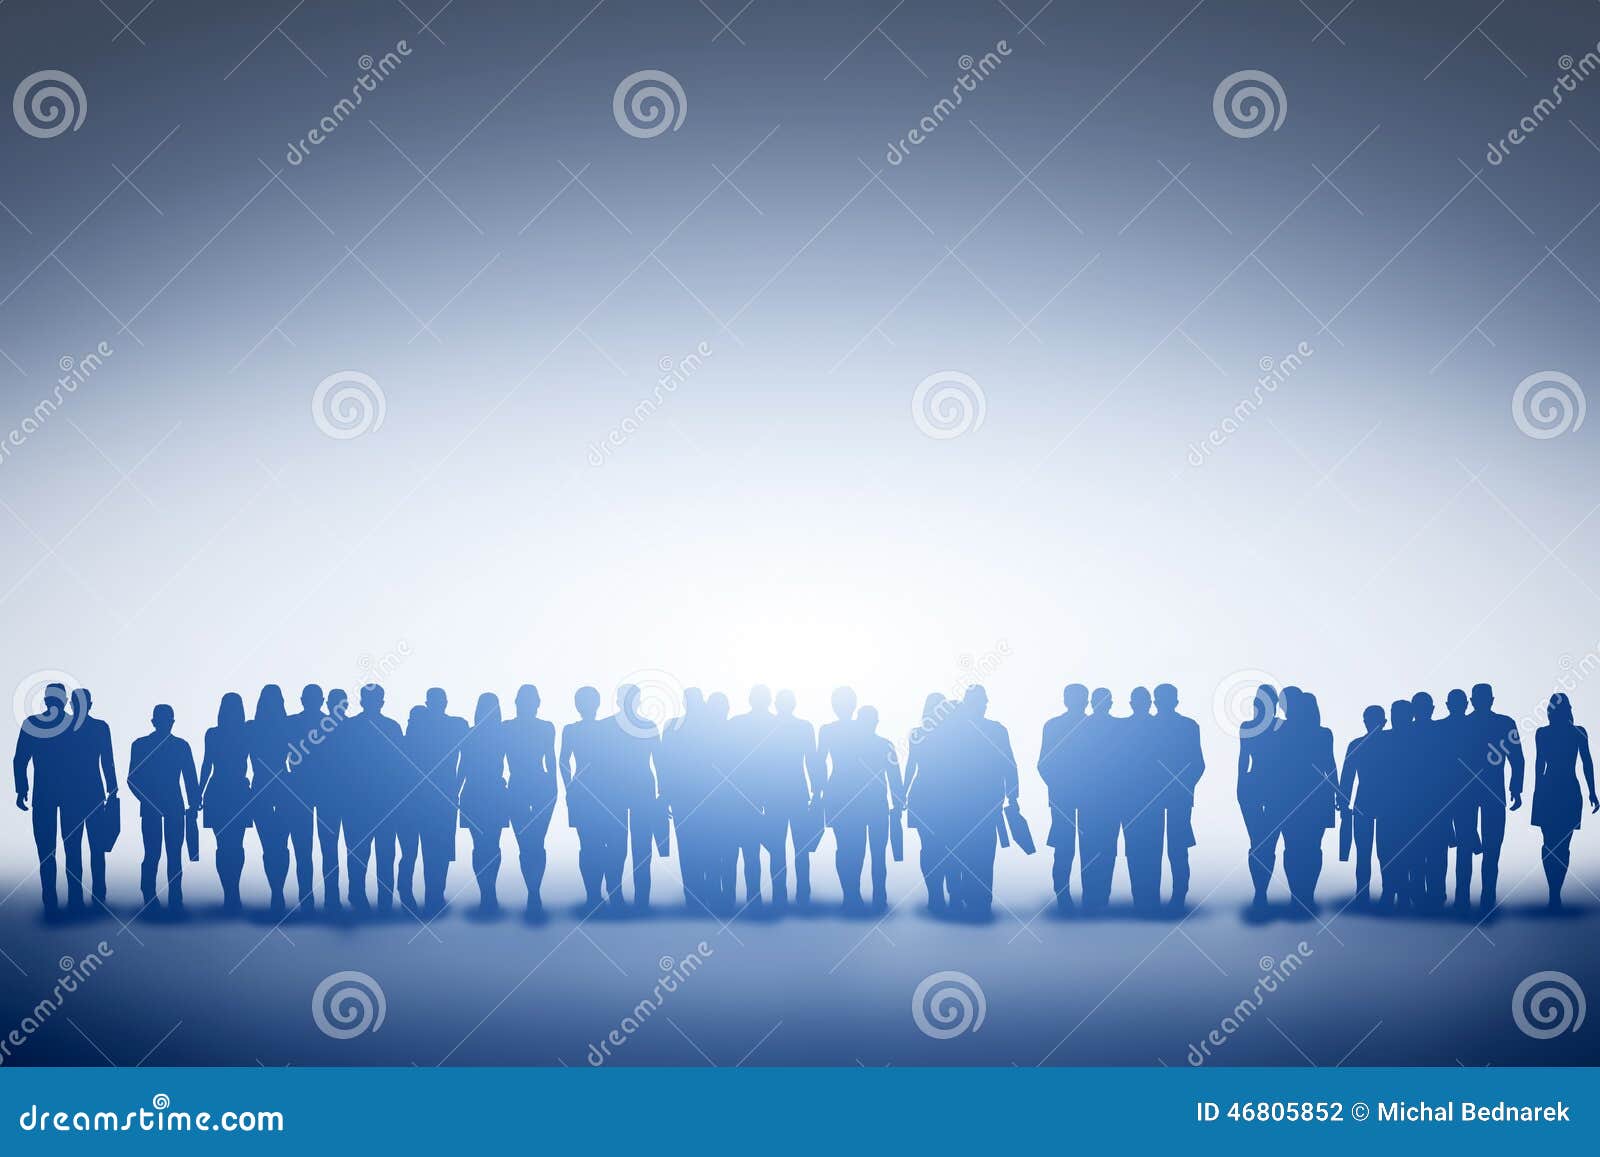 group of various people looking towards light, future.